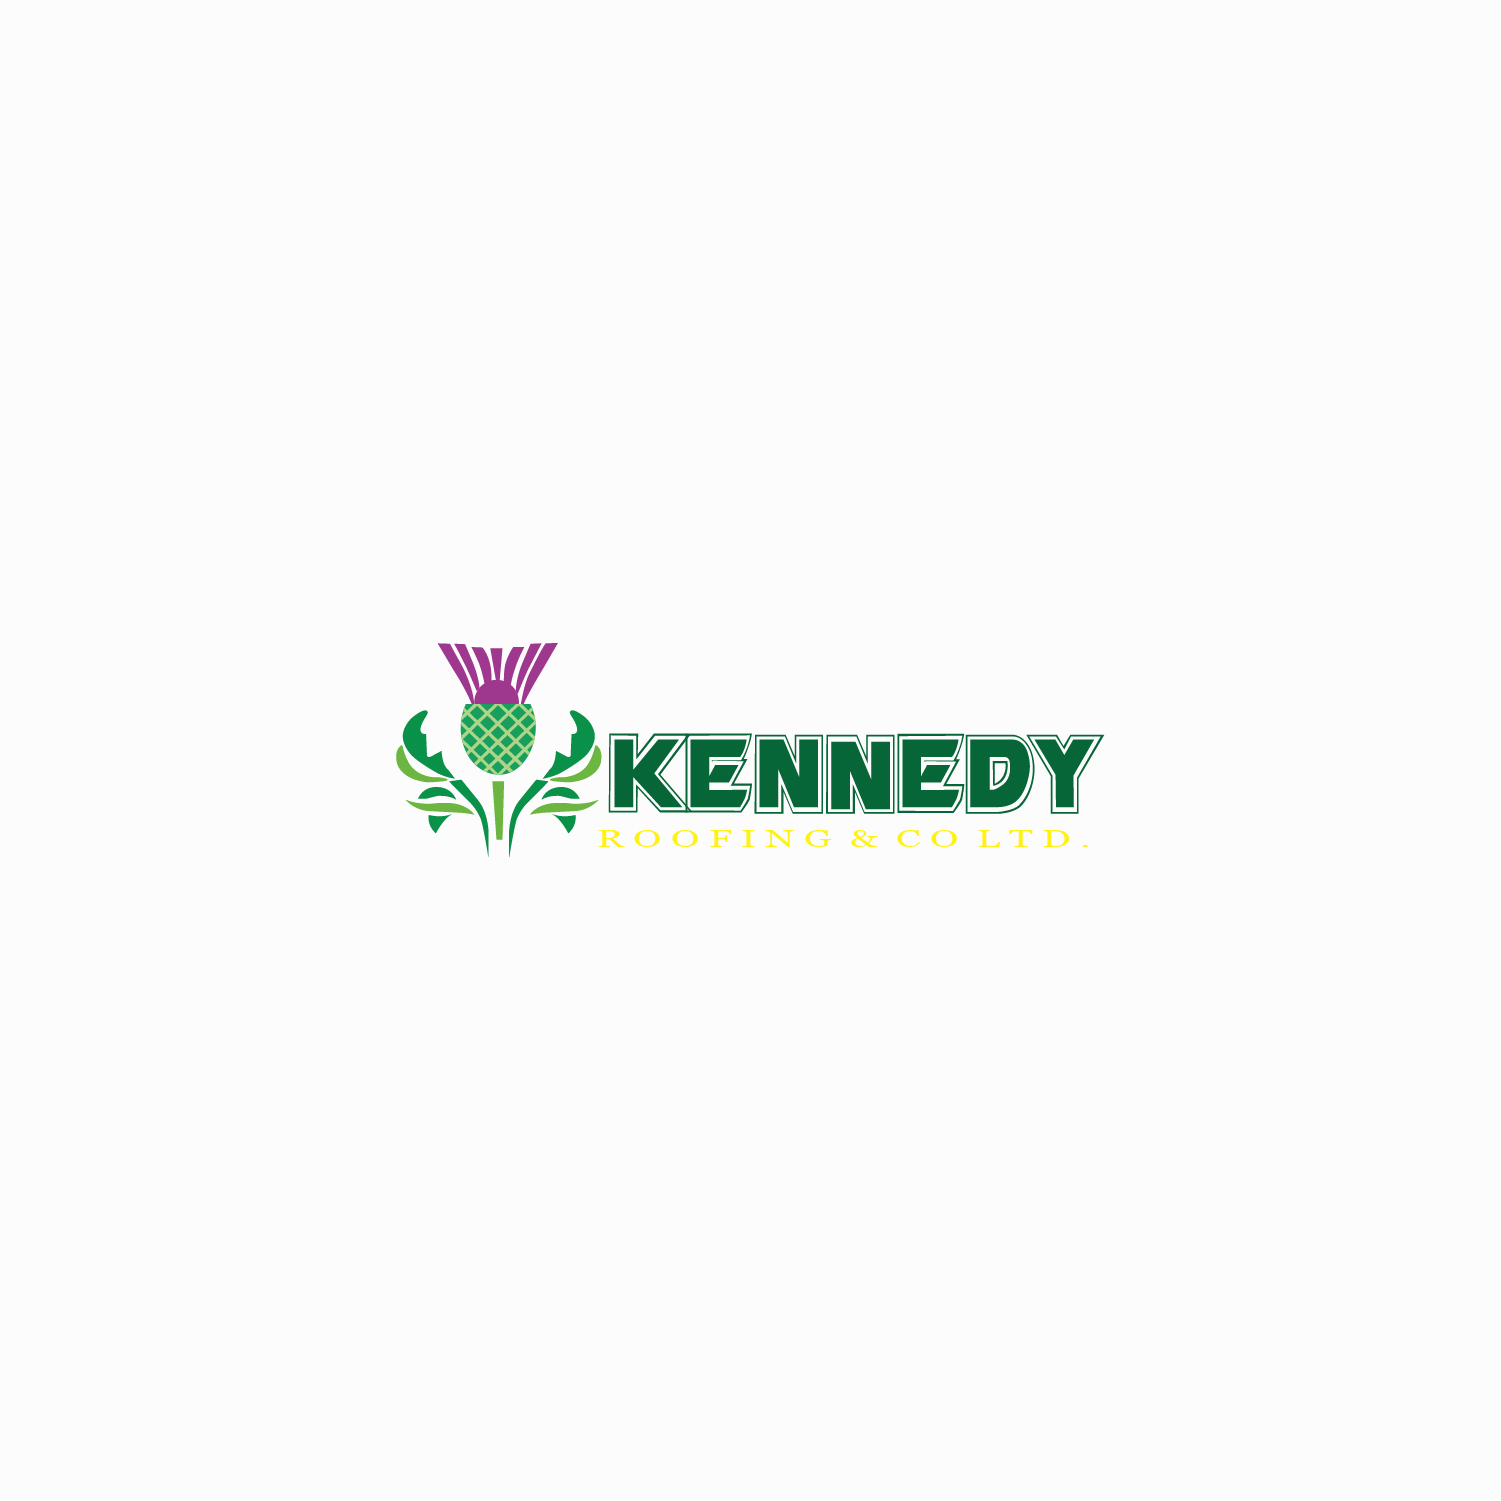 Logo of Kennedy Roofing Yorkshire Roofing Services In York